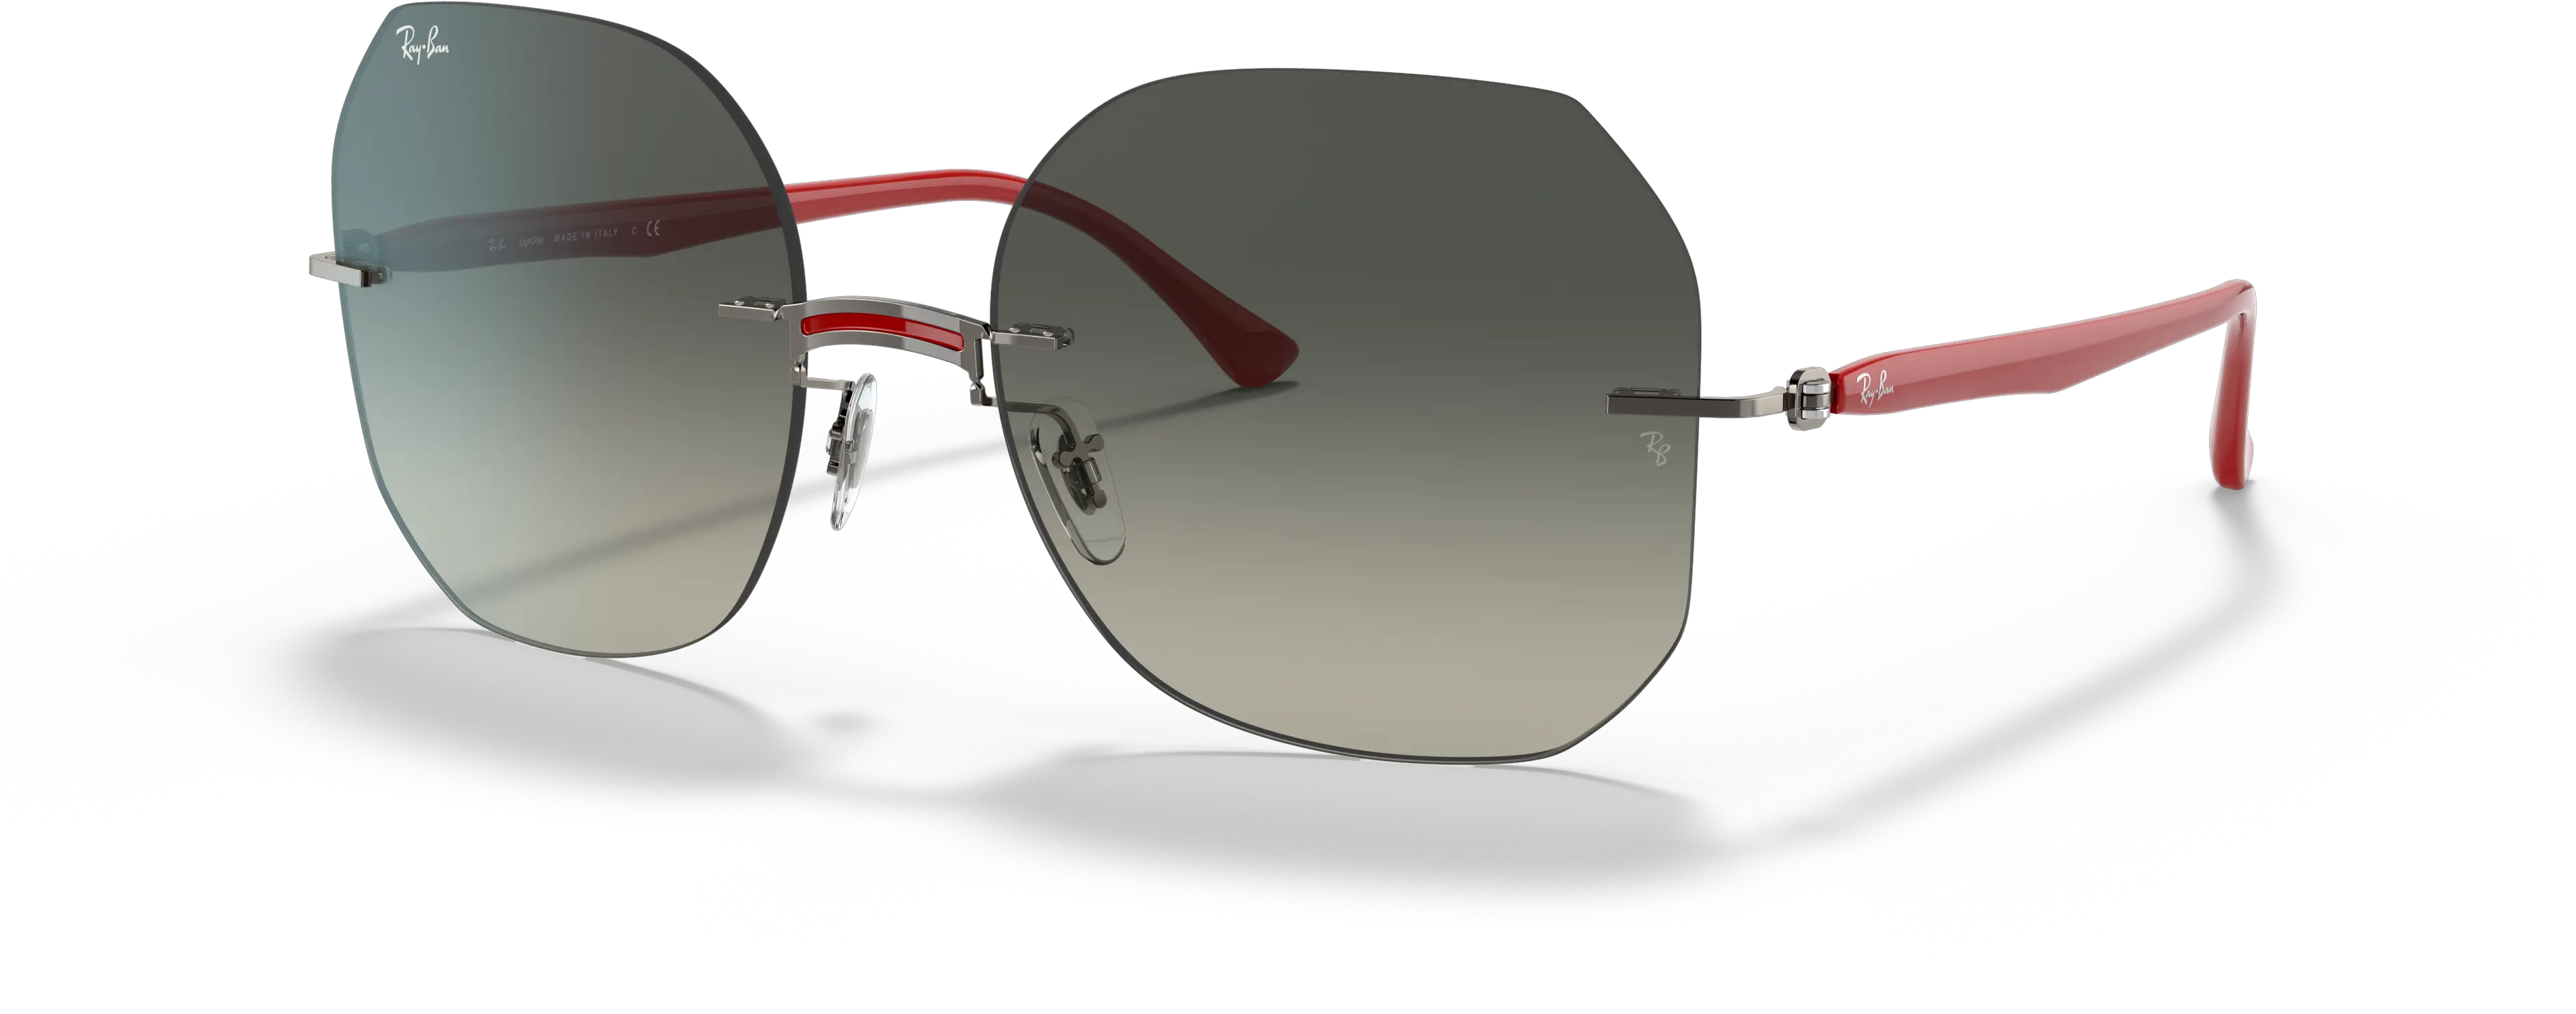 Rb8067 Titanium Sunglasses In Red And Grey Ray Ban Rayban 8067 Png Silhouette Icon 8130